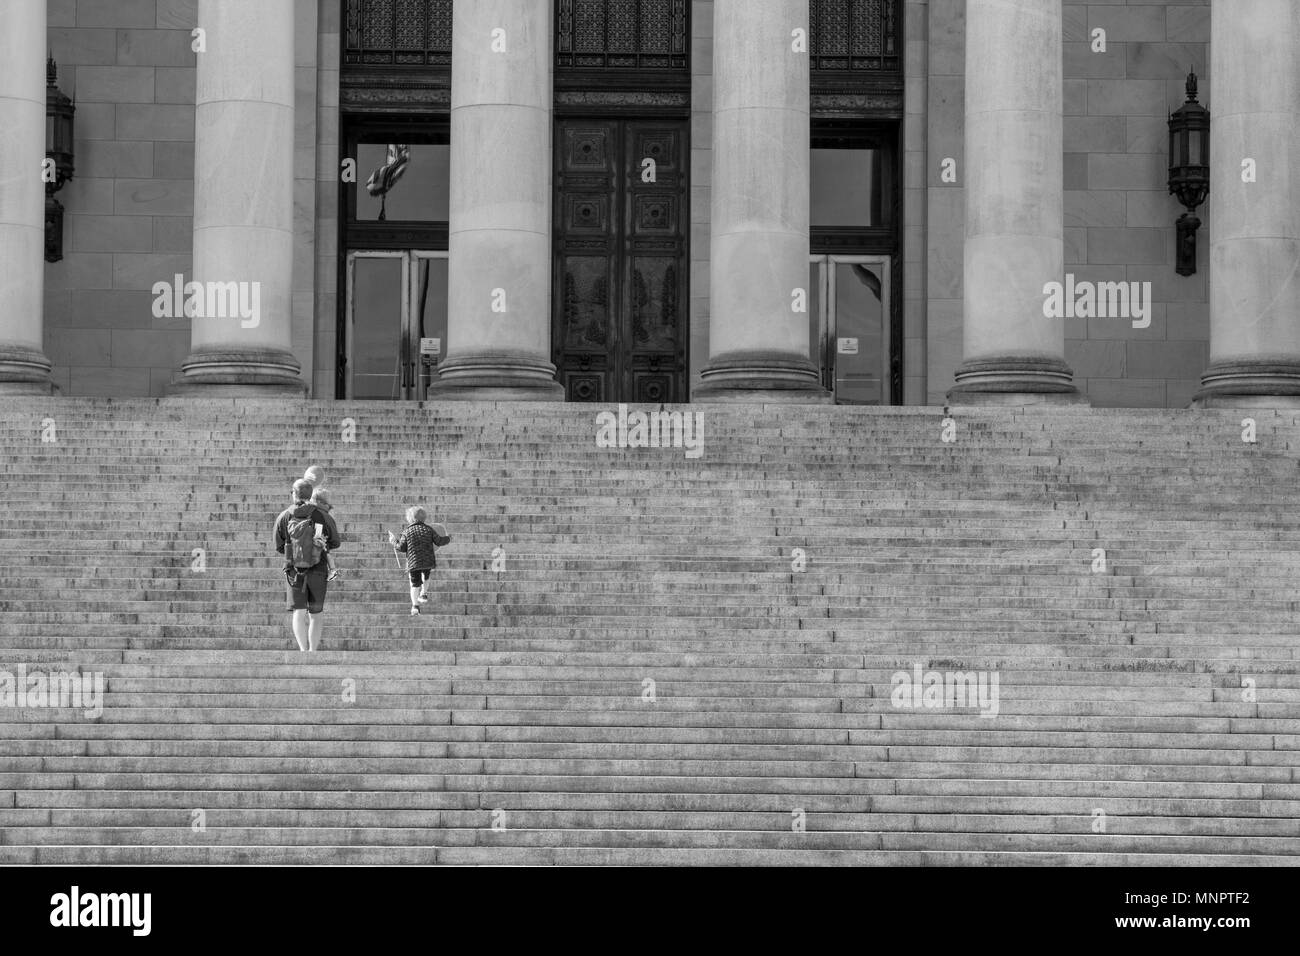 Olympia, Washington / USA - May 5, 2018: A father and his children walk up the steps of the Washington State Capitol building carrying balloons on a b Stock Photo